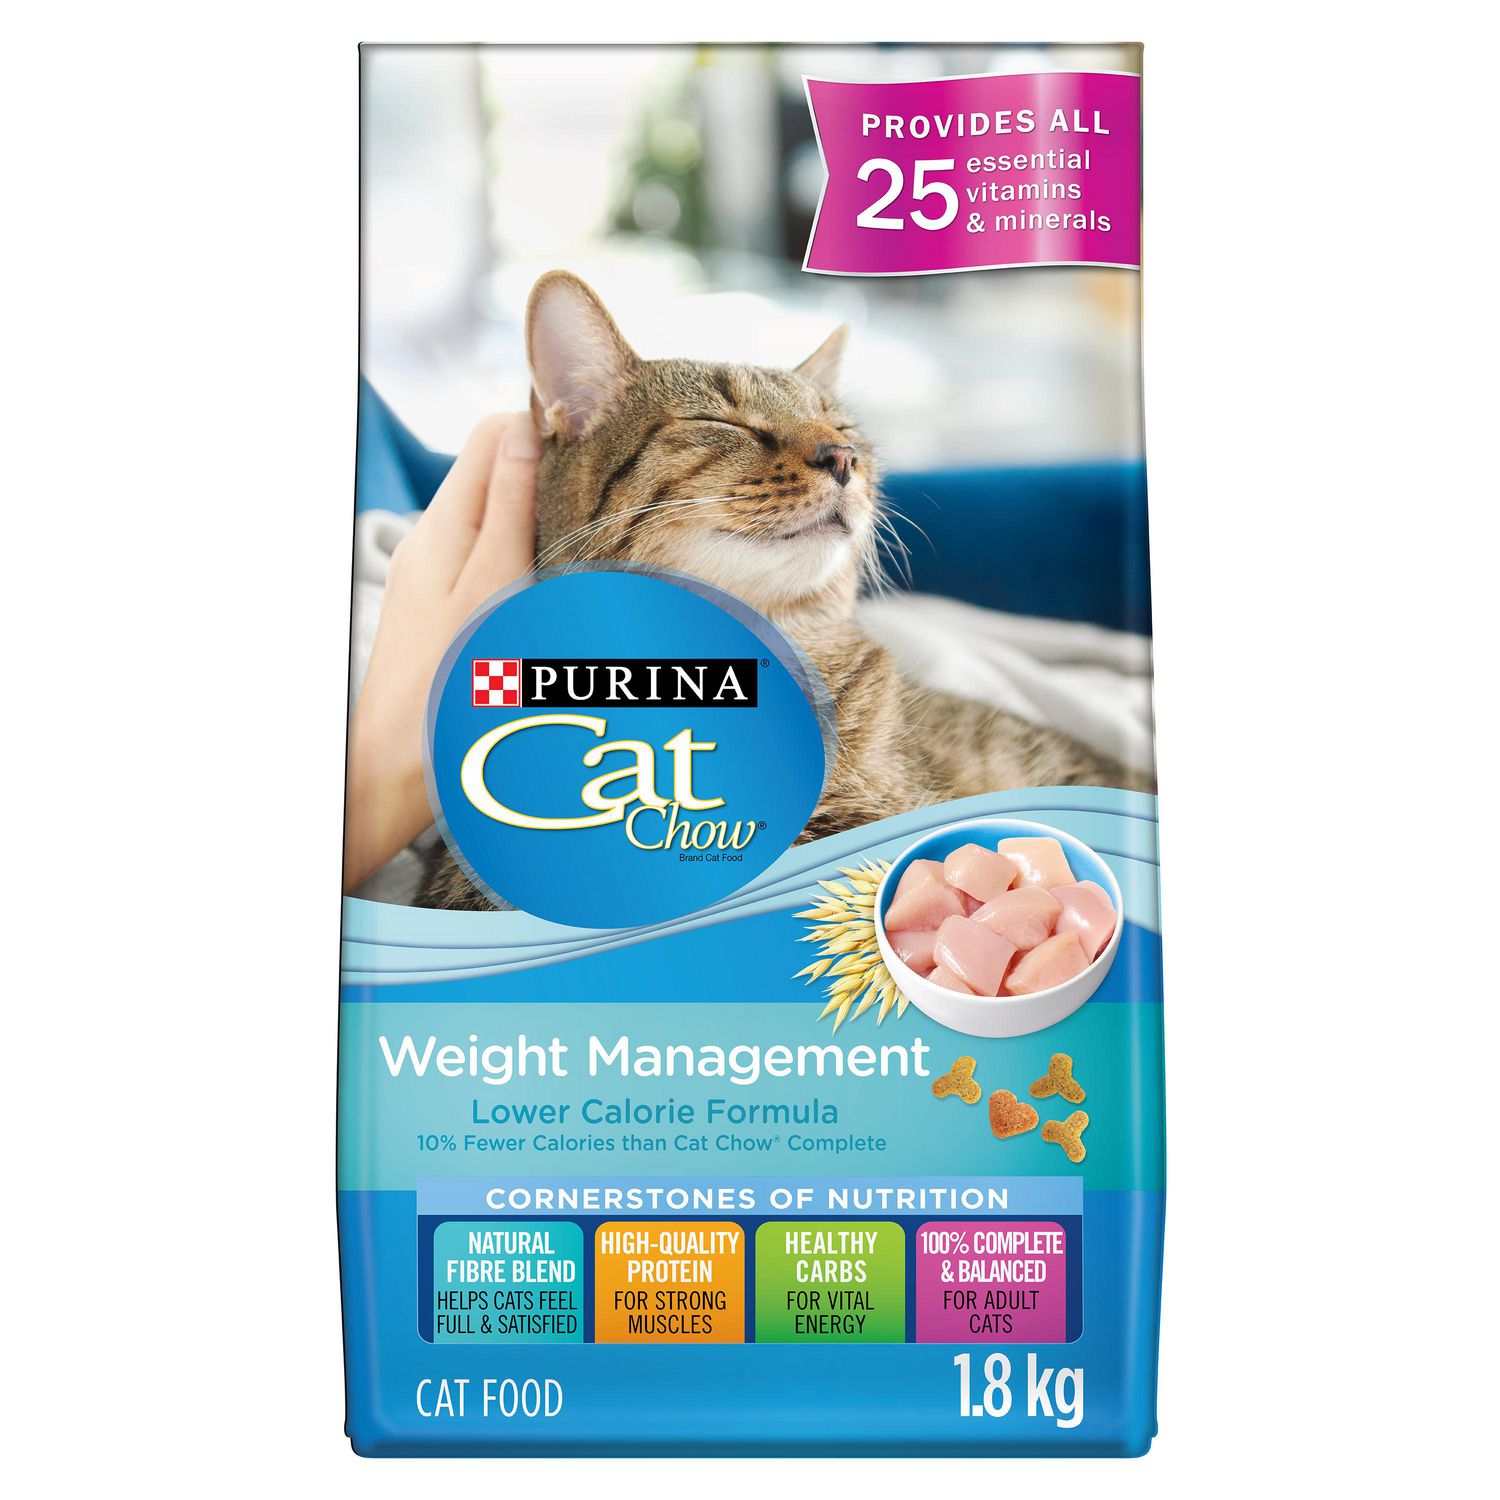 Cat Chow Dry Cat Food, Weight Management Walmart Canada